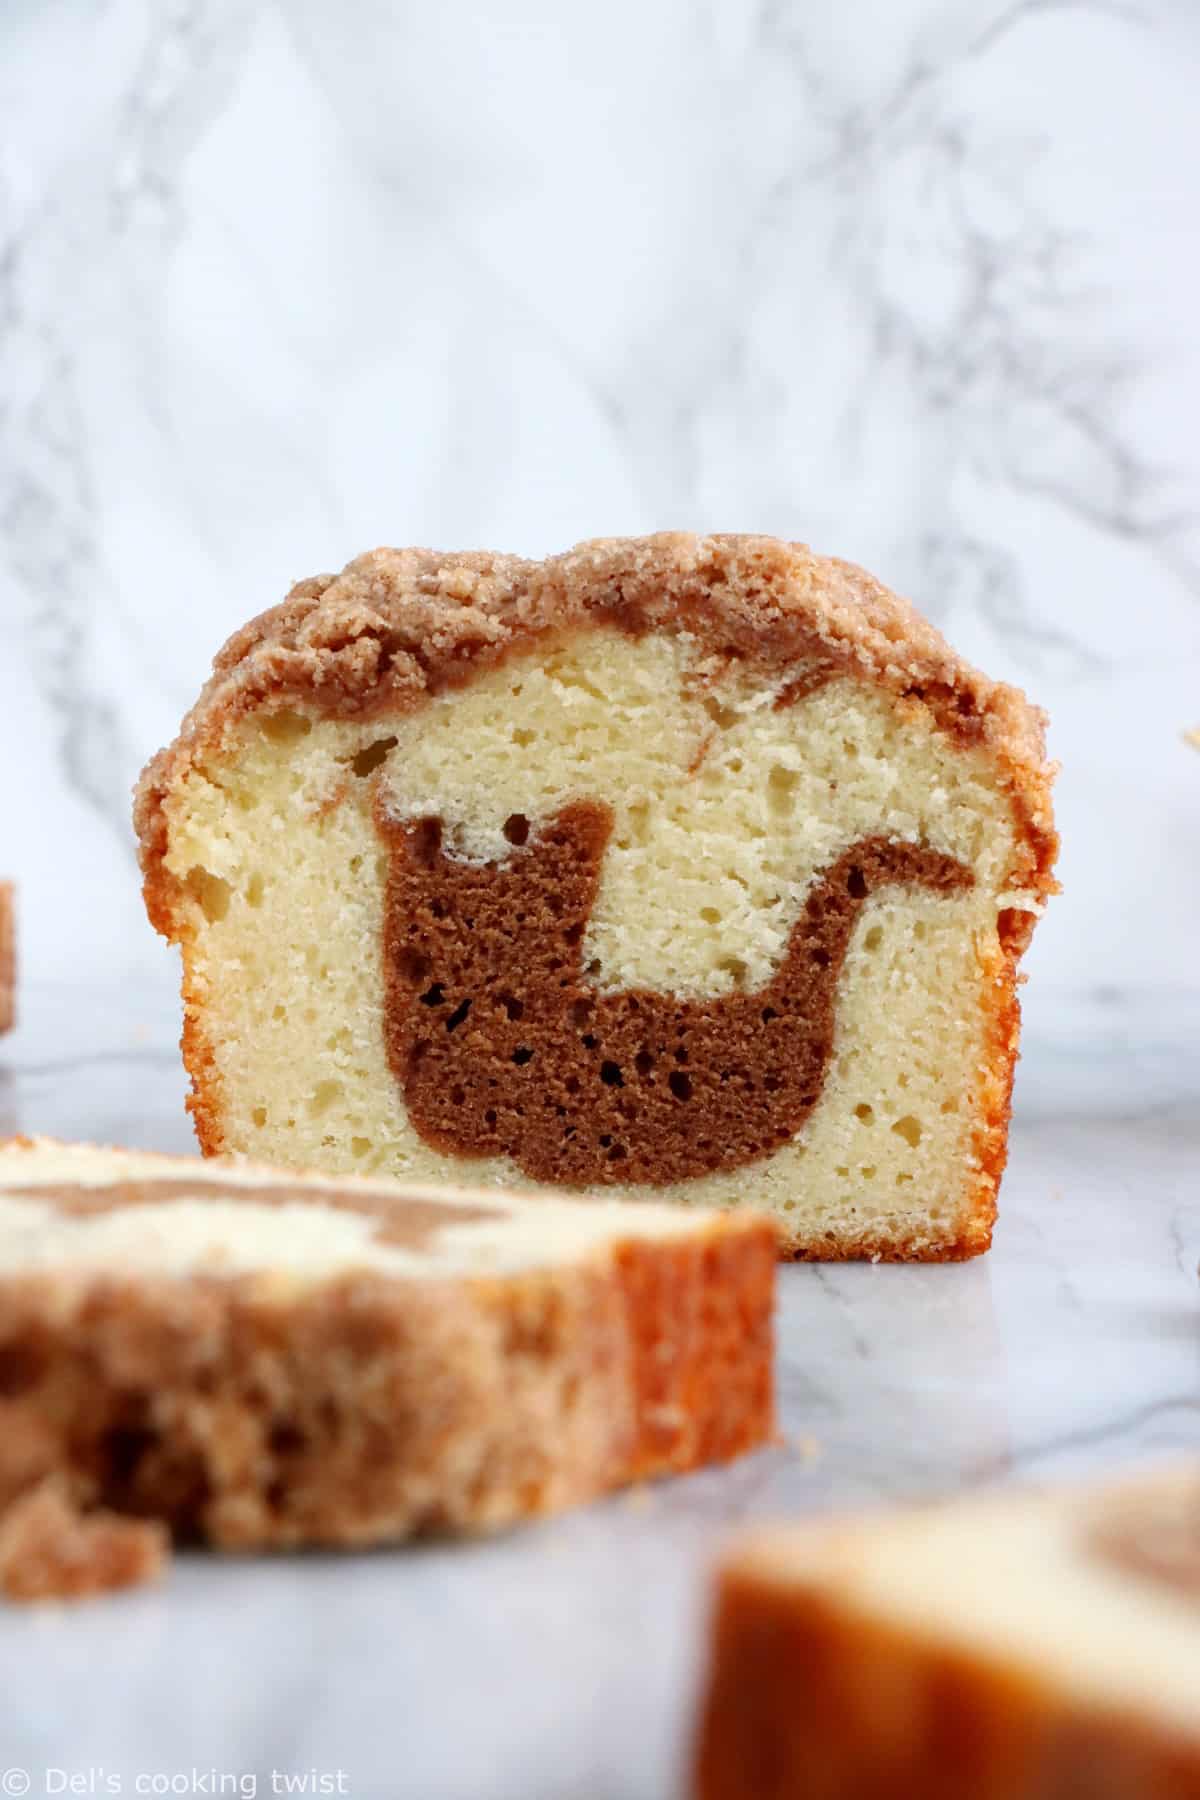 This streusel cinnamon swirl coffee cake is a simple recipe packed with cinnamon flavors.